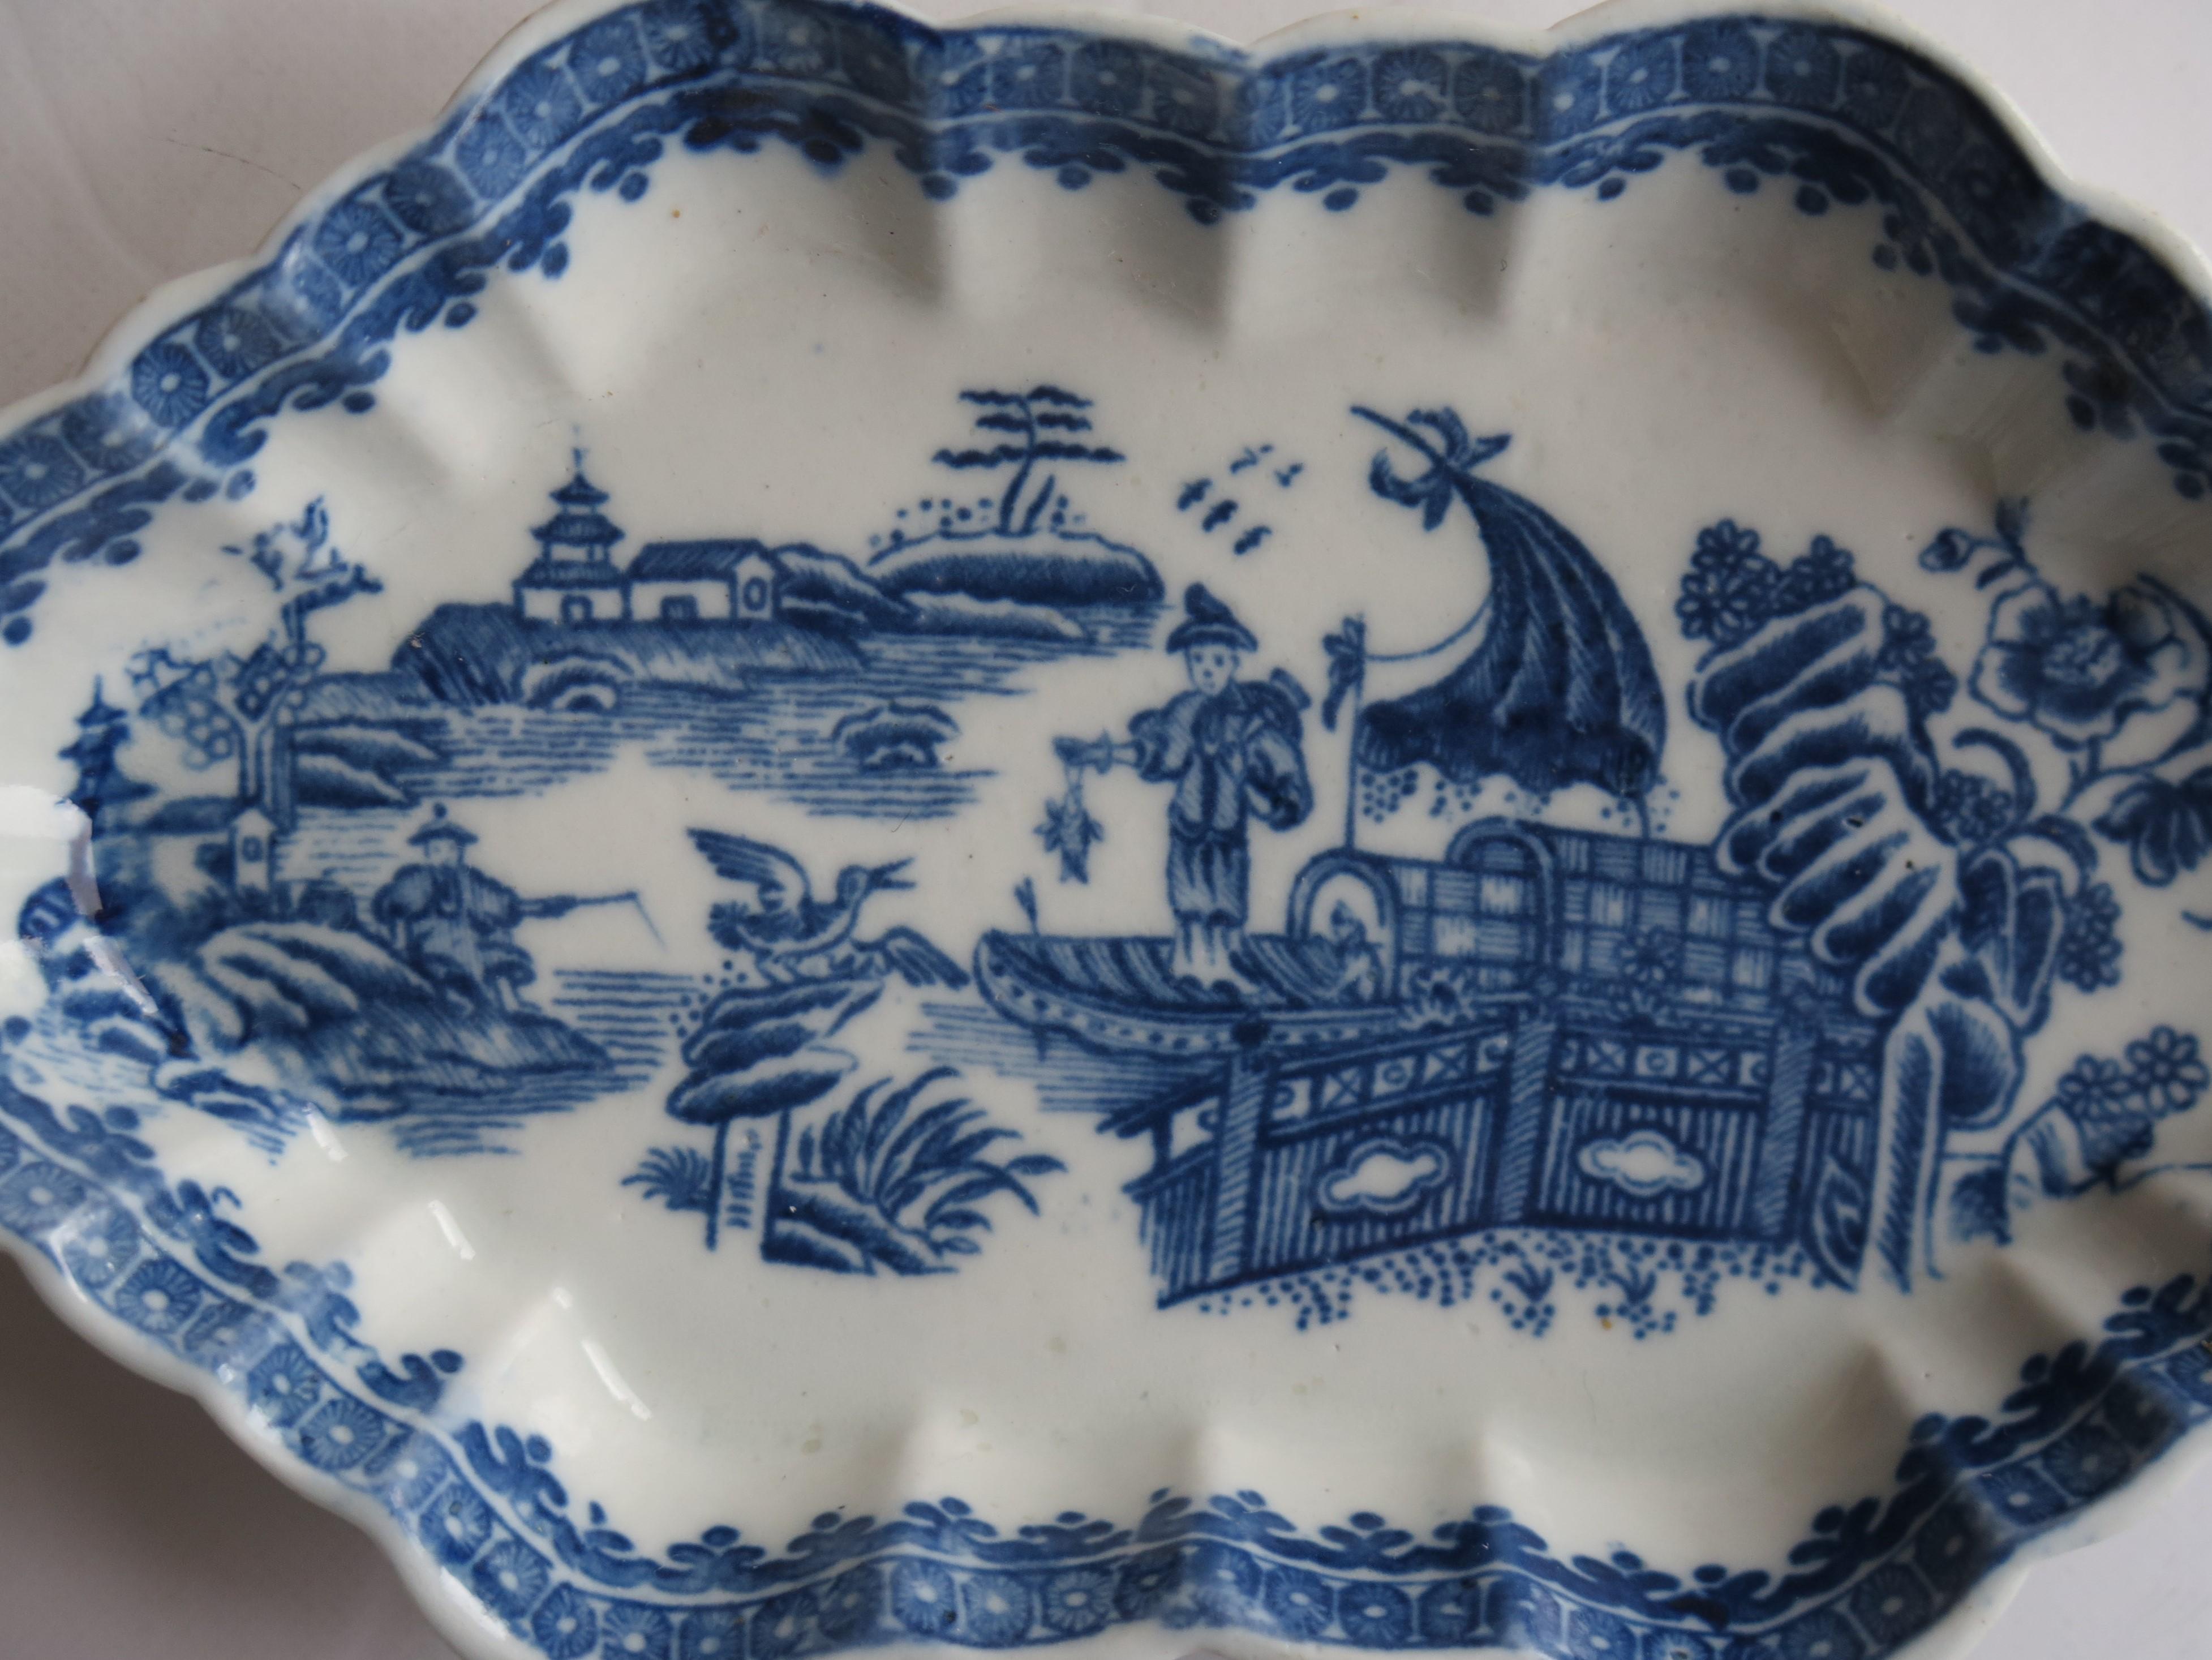 This is an excellent example of a porcelain Spoon Tray made by the Caughley factory, Shropshire, England.

The Spoon Tray is made of porcelain and is vertically fluted with a wavy rim.

It is decorated in the distinctive transfer printed cobalt